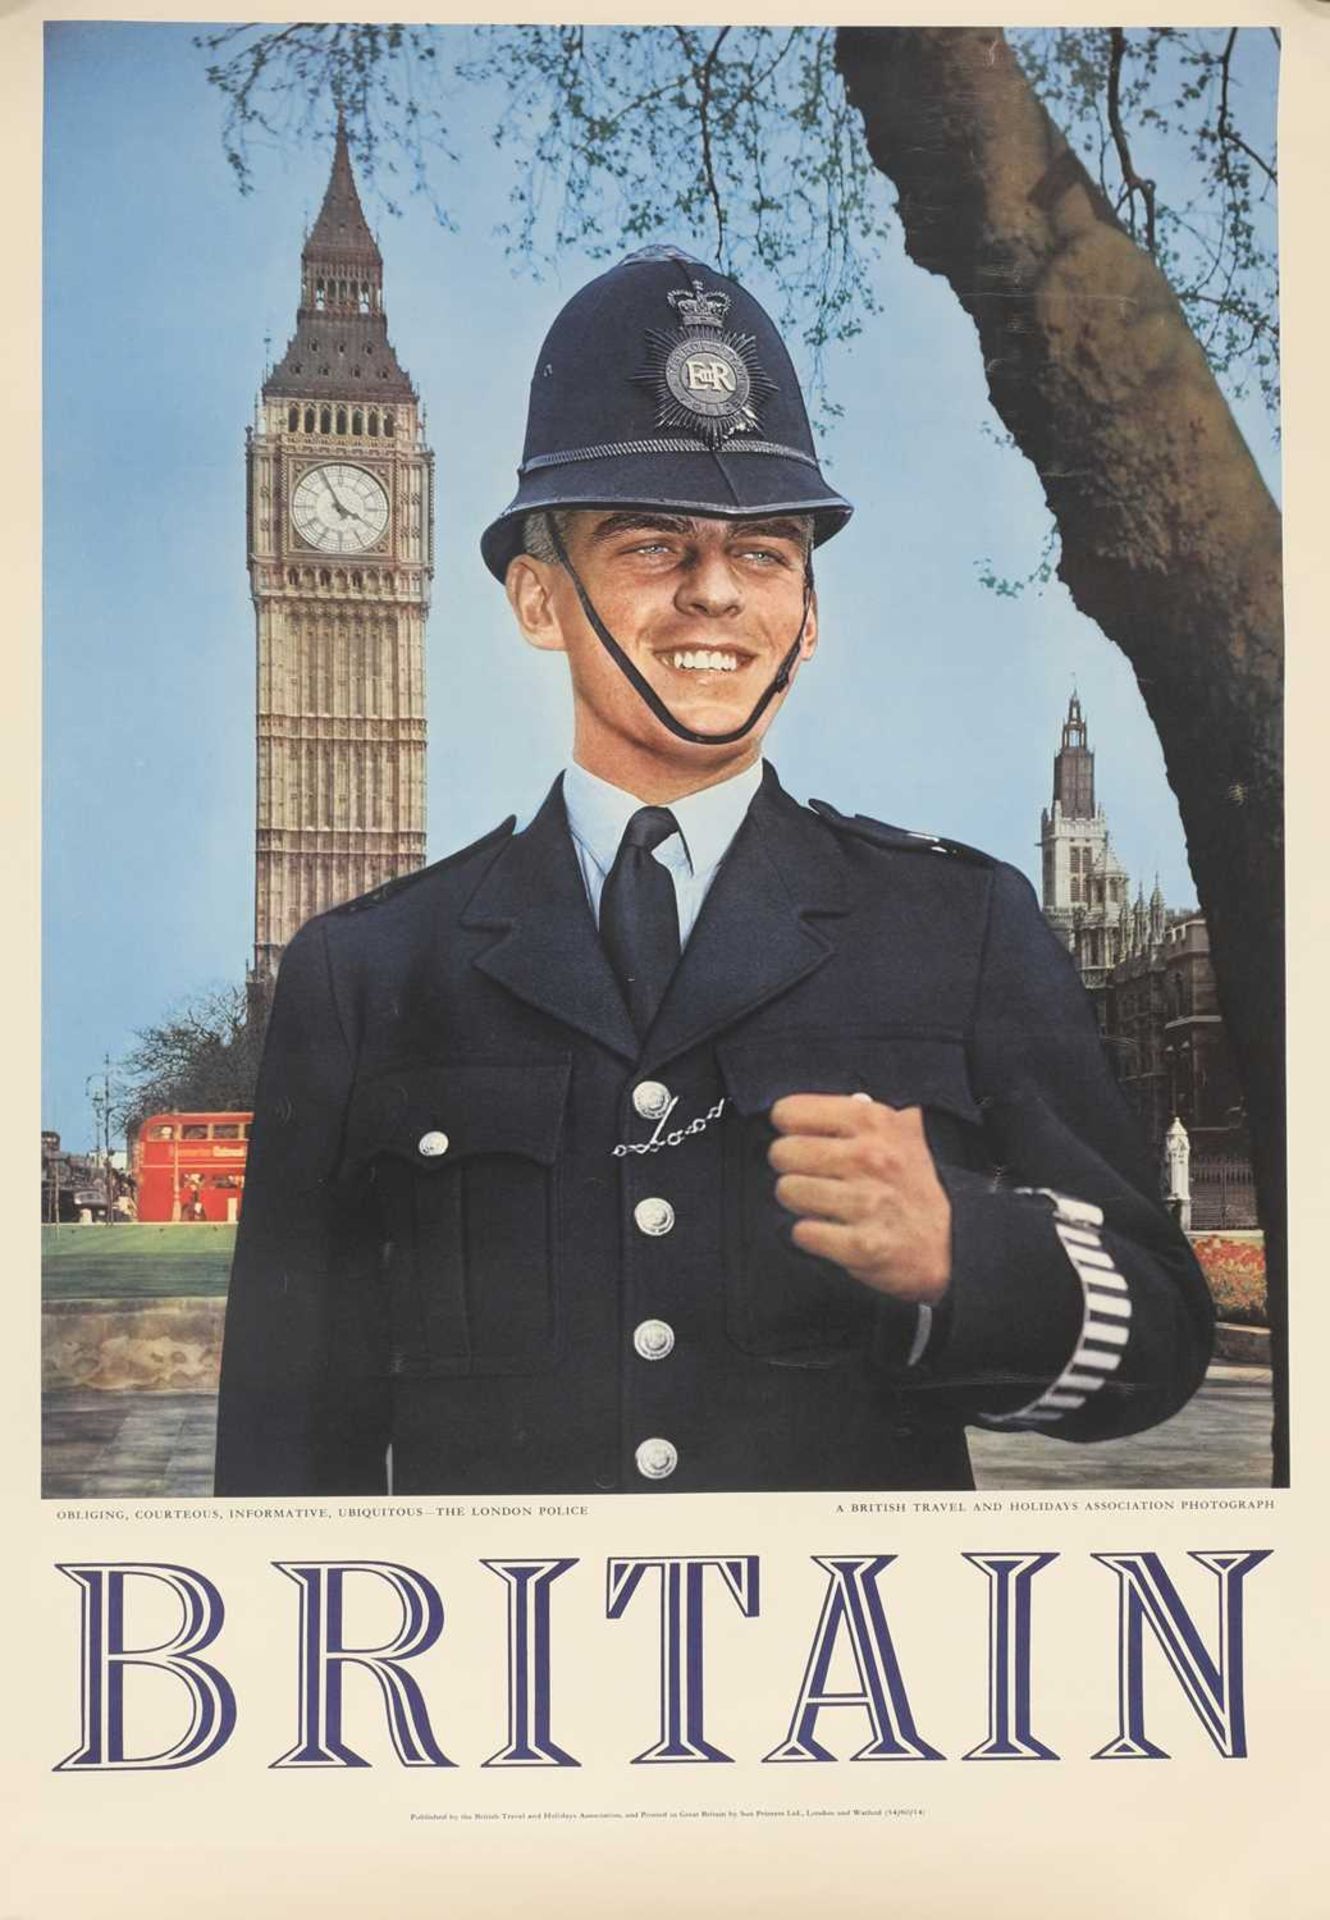 BRITAIN - THE LONDON POLICE,